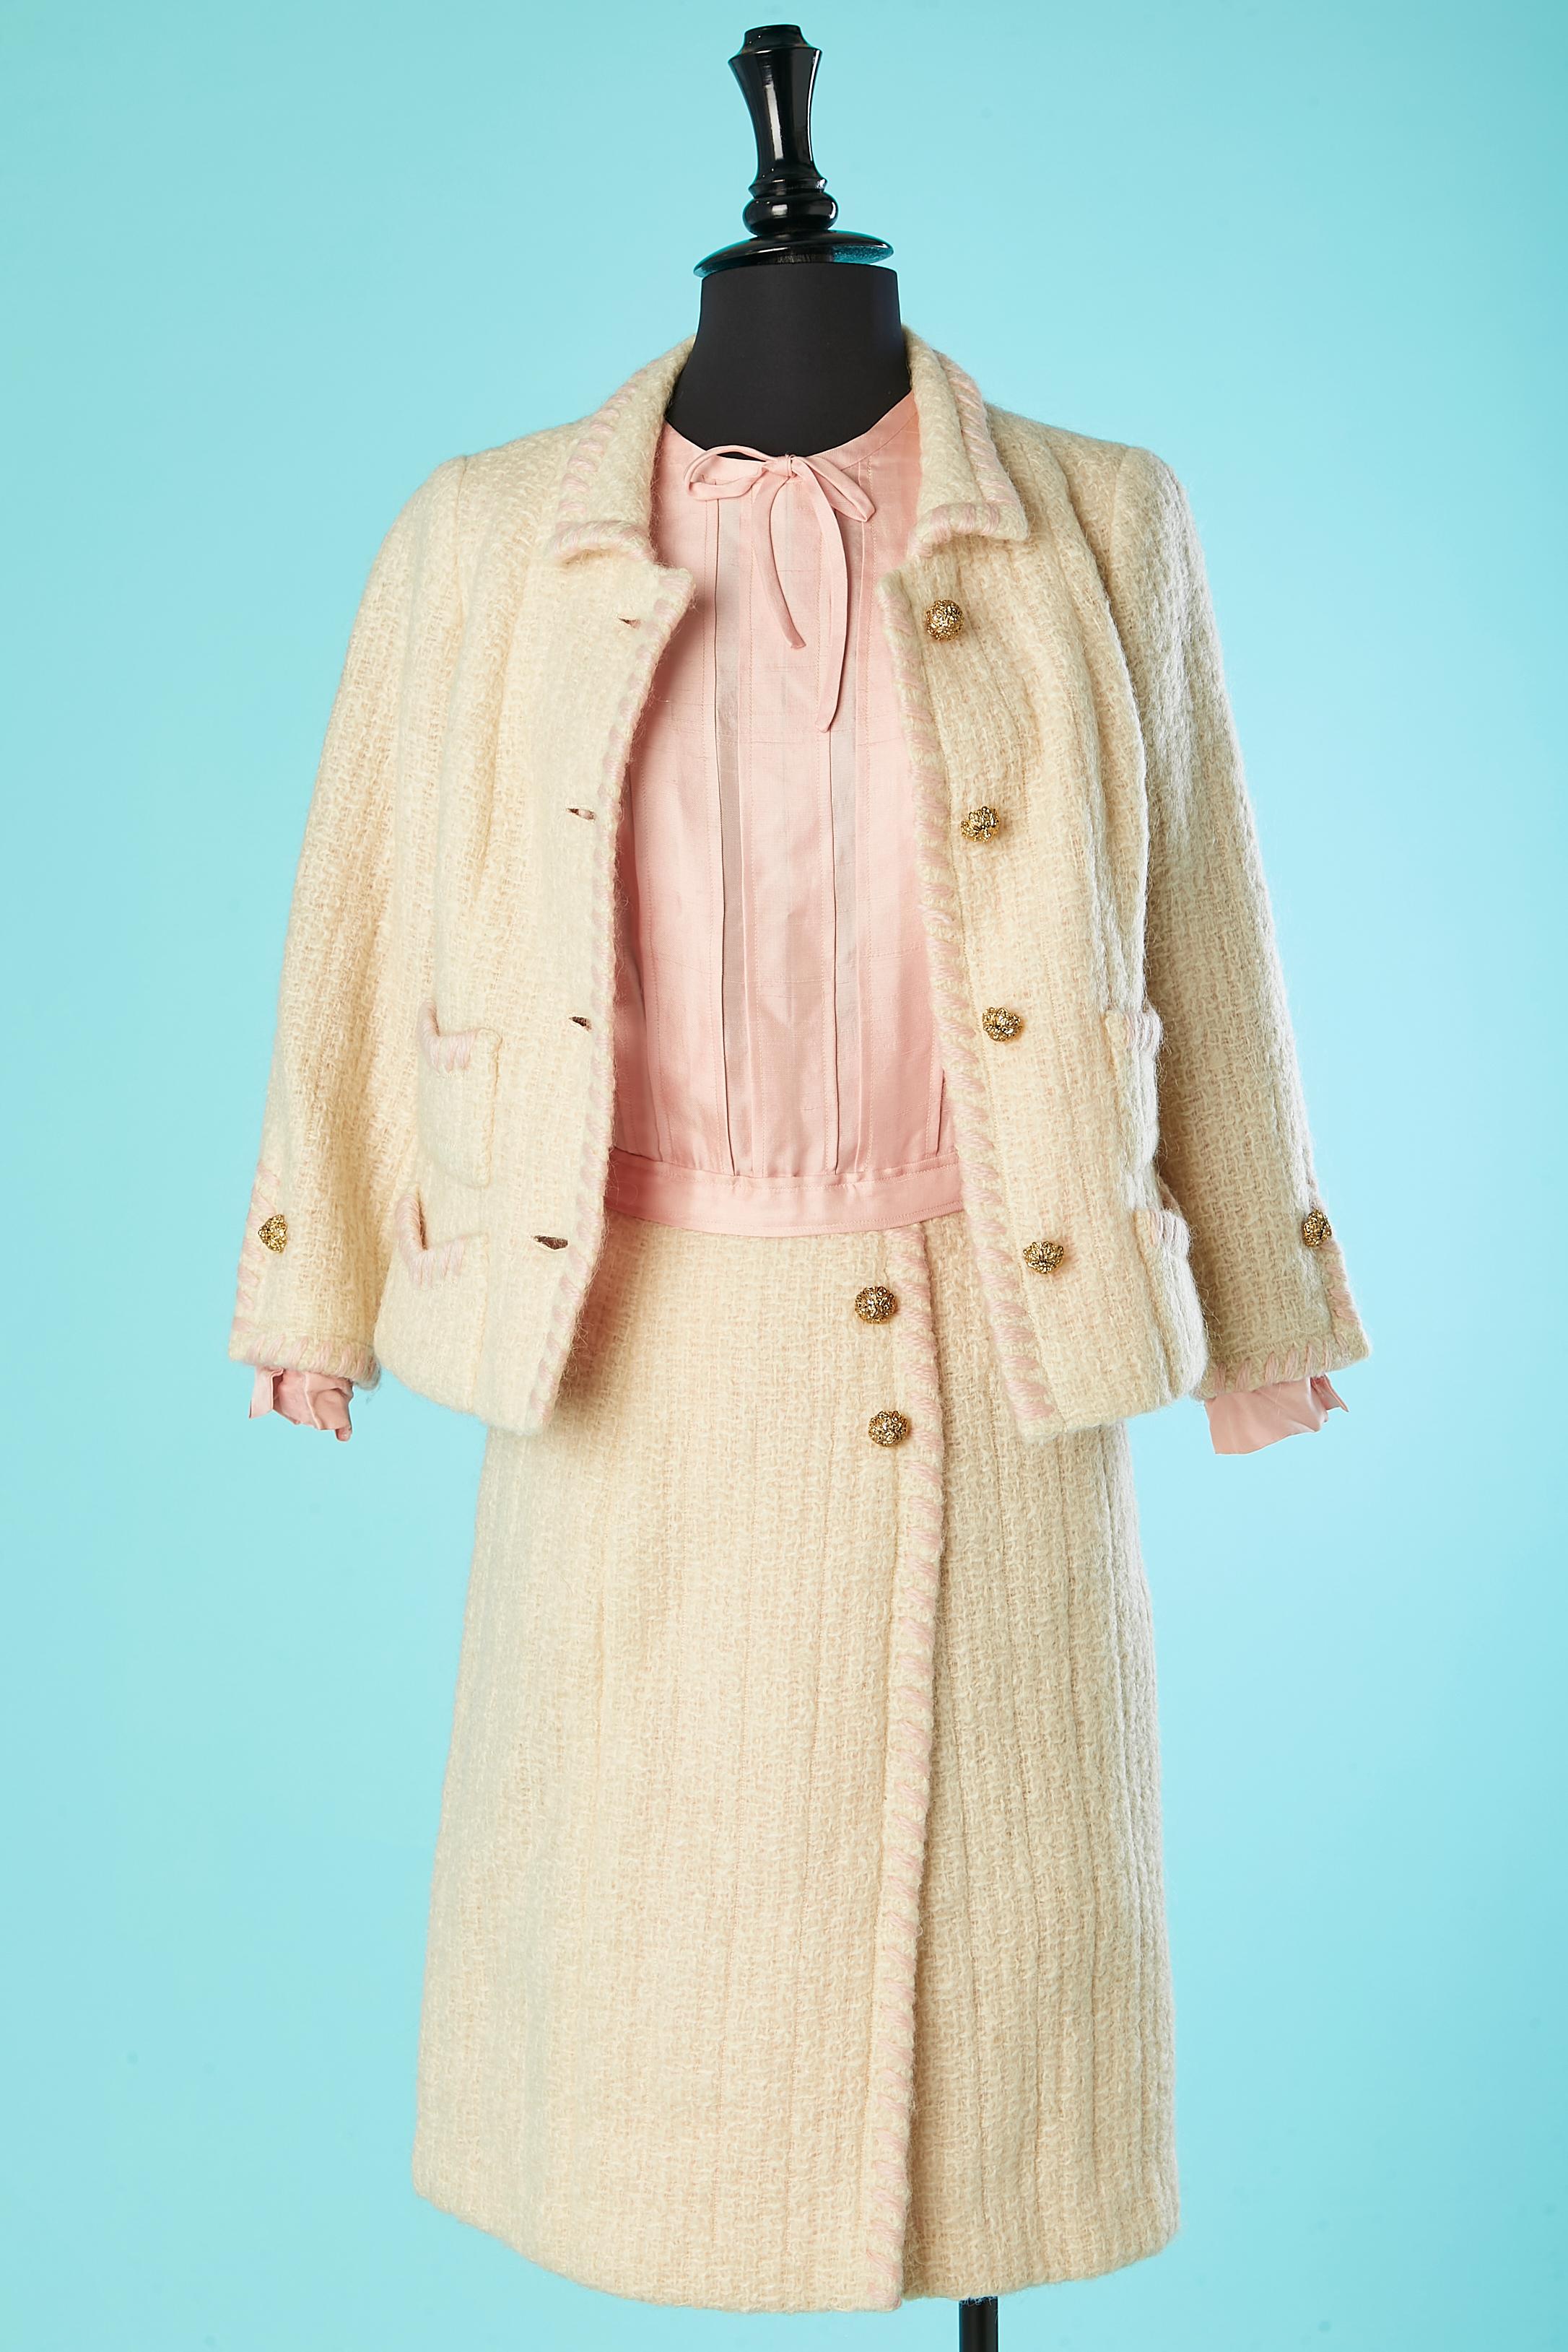 Off-white tweed and pale silk jacket and dress ensemble Chanel 1964  4